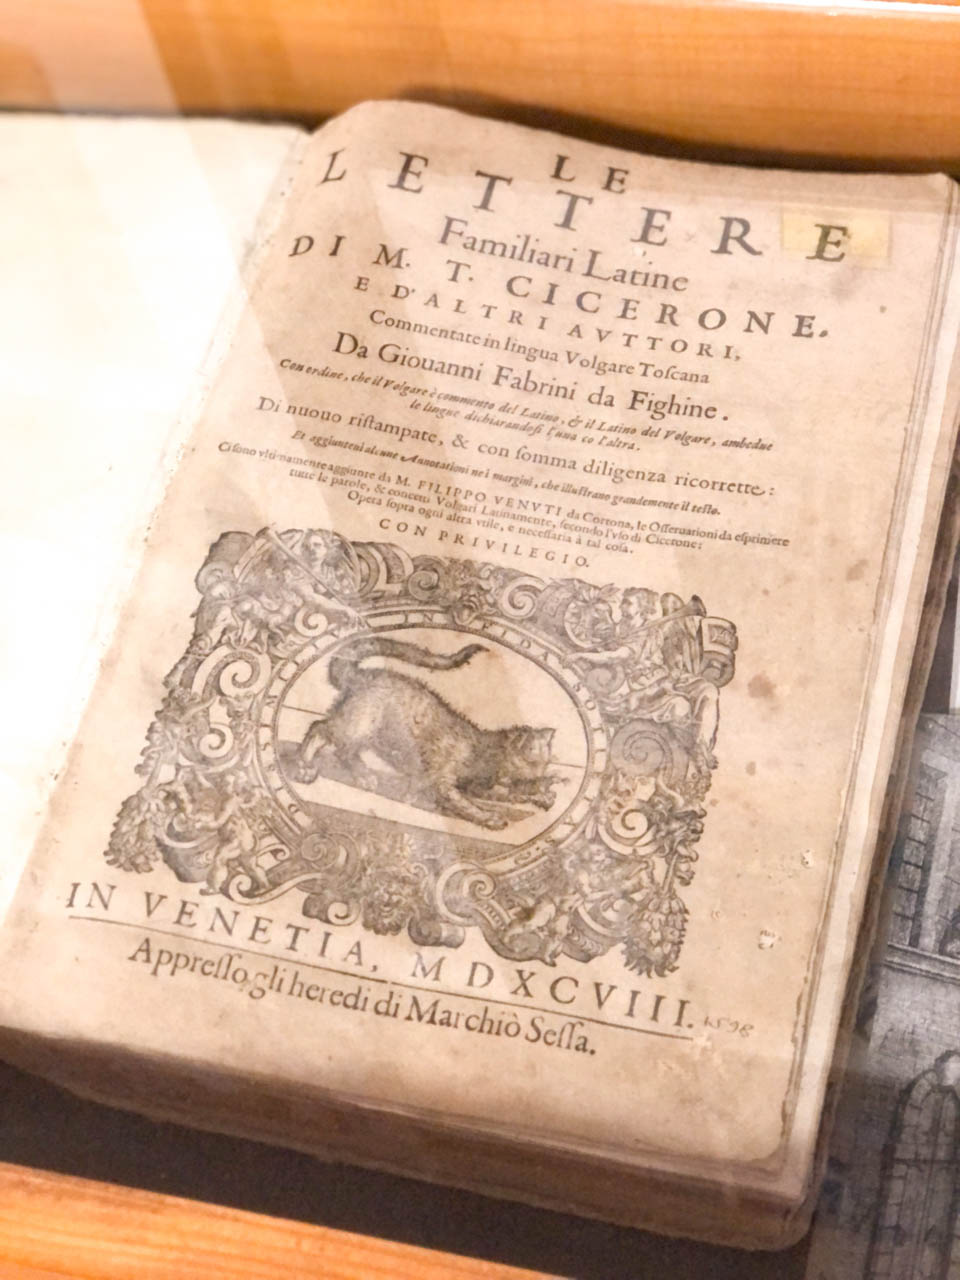 An old book with a cat on the title page on display at the Cat Museum in Kotor, Montenegro